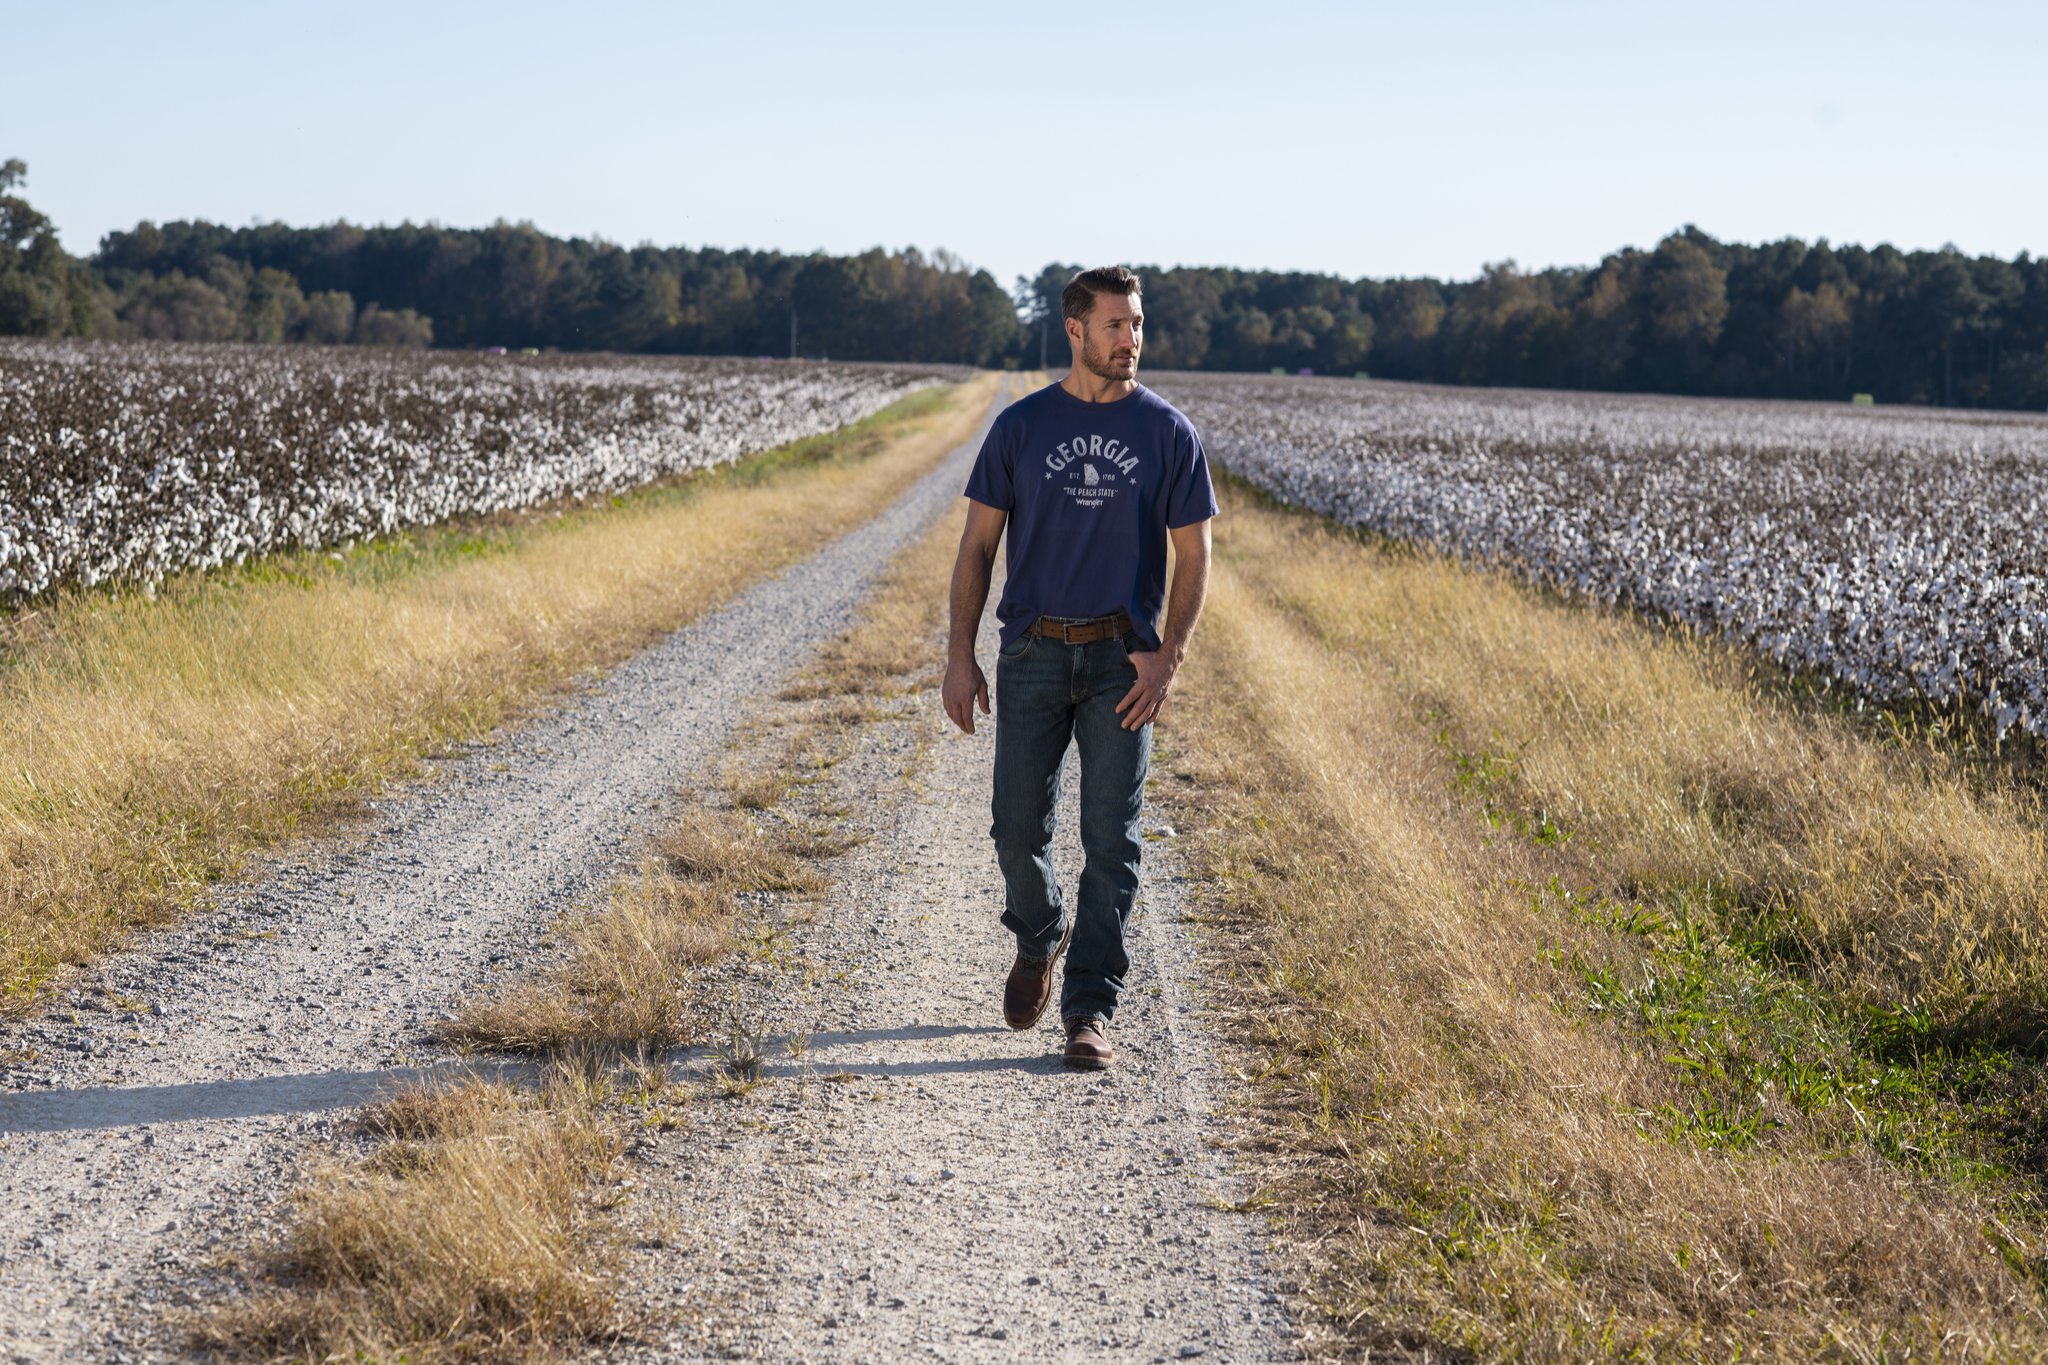 Why Georgia farmer is working with Wrangler jeans